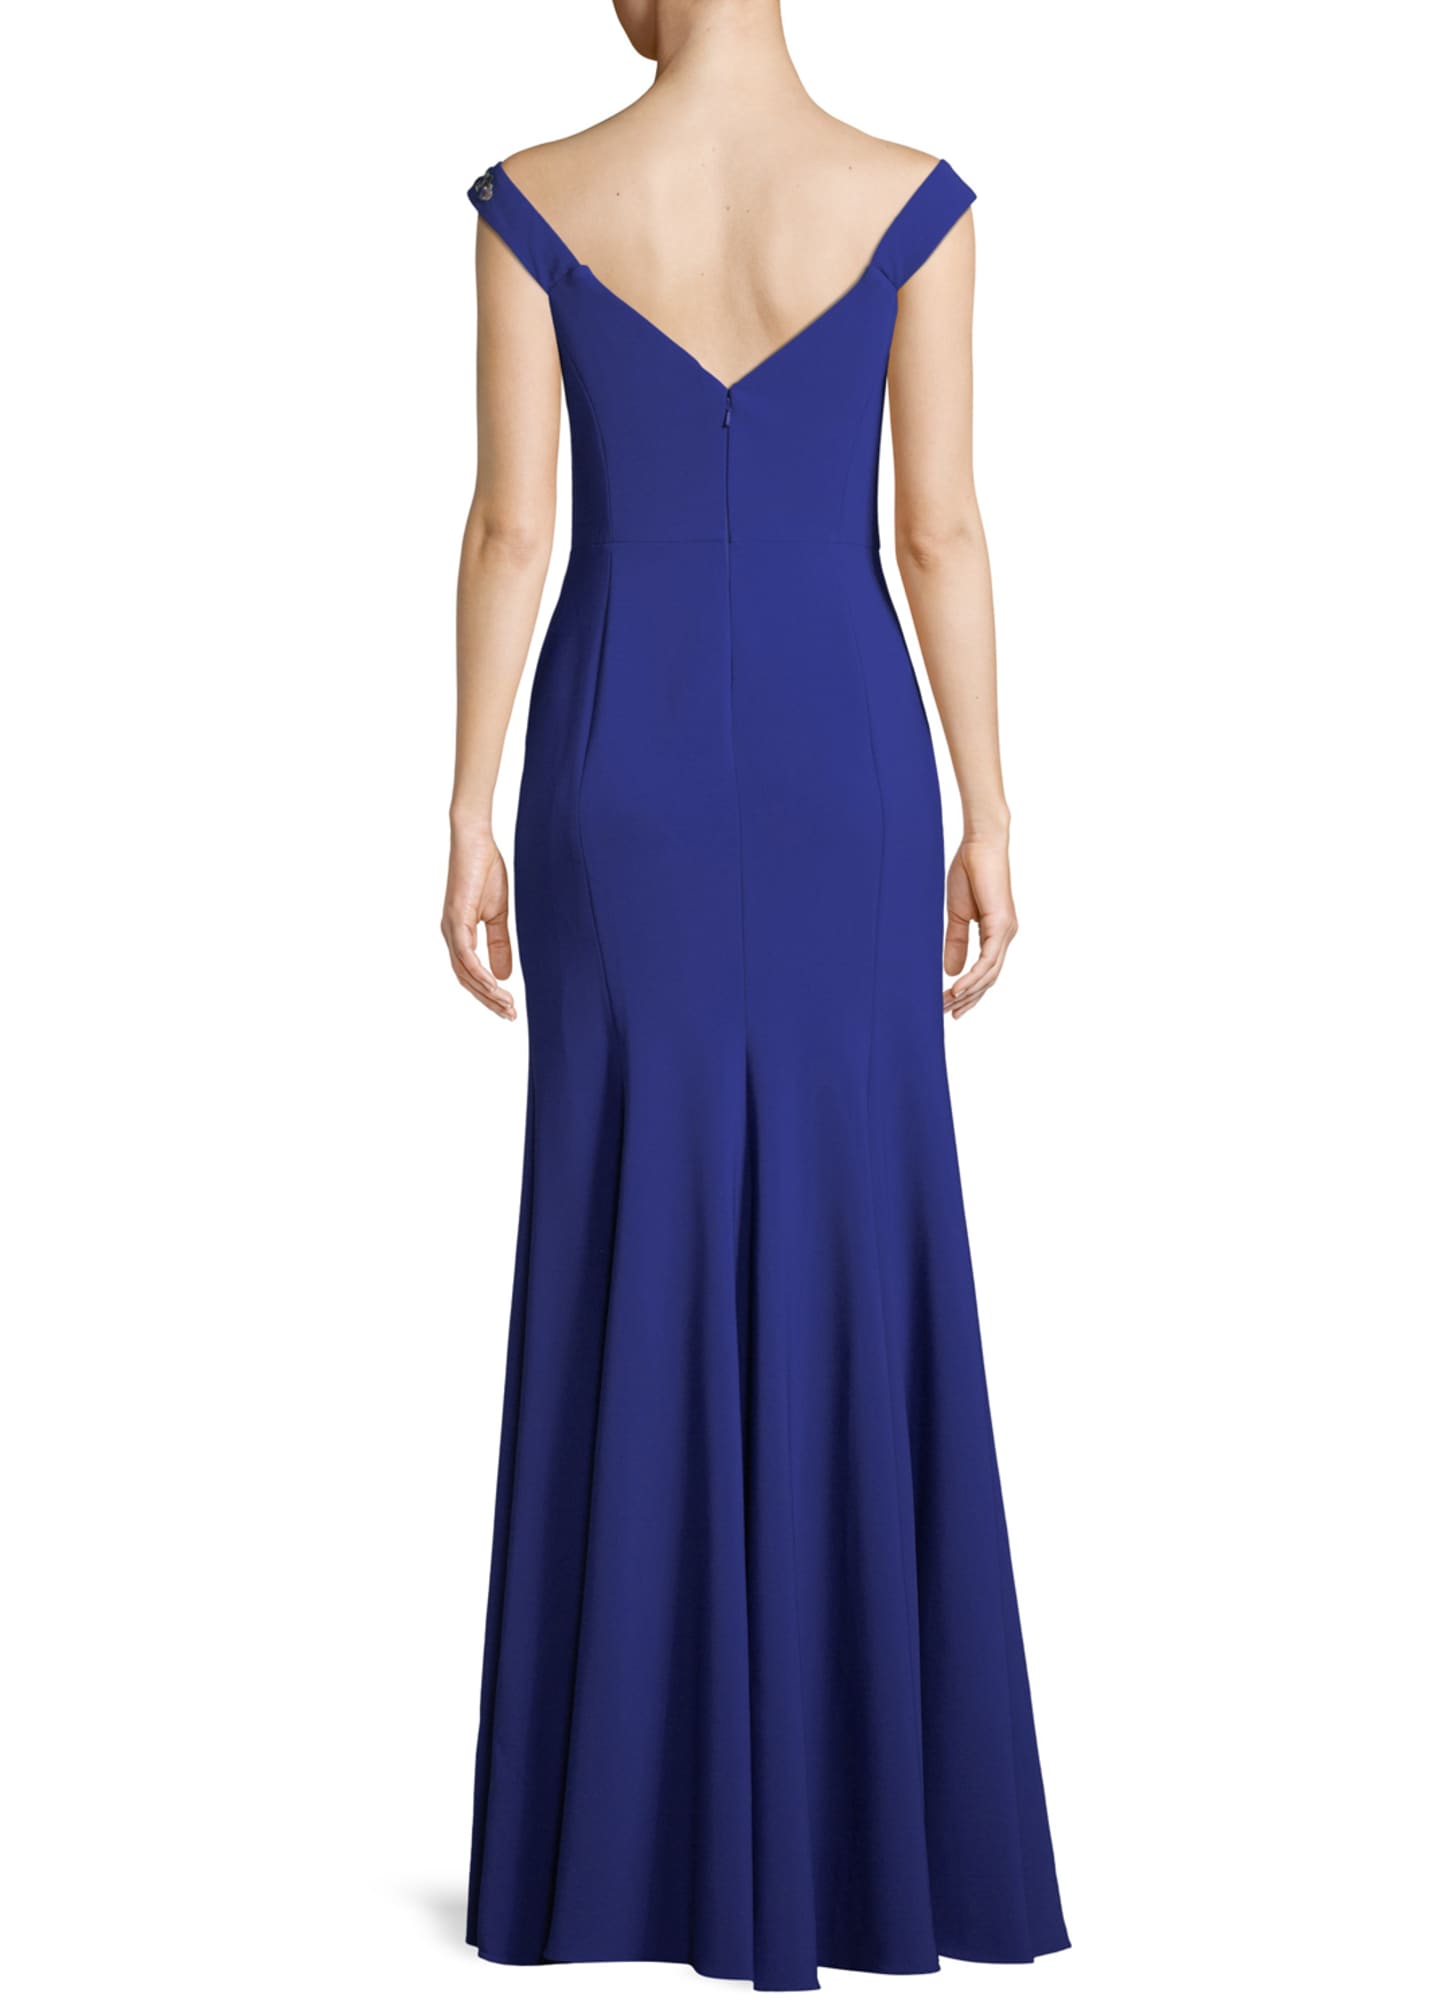 Marchesa Notte Stretch Crepe Off-the-Shoulder Gown - Bergdorf Goodman